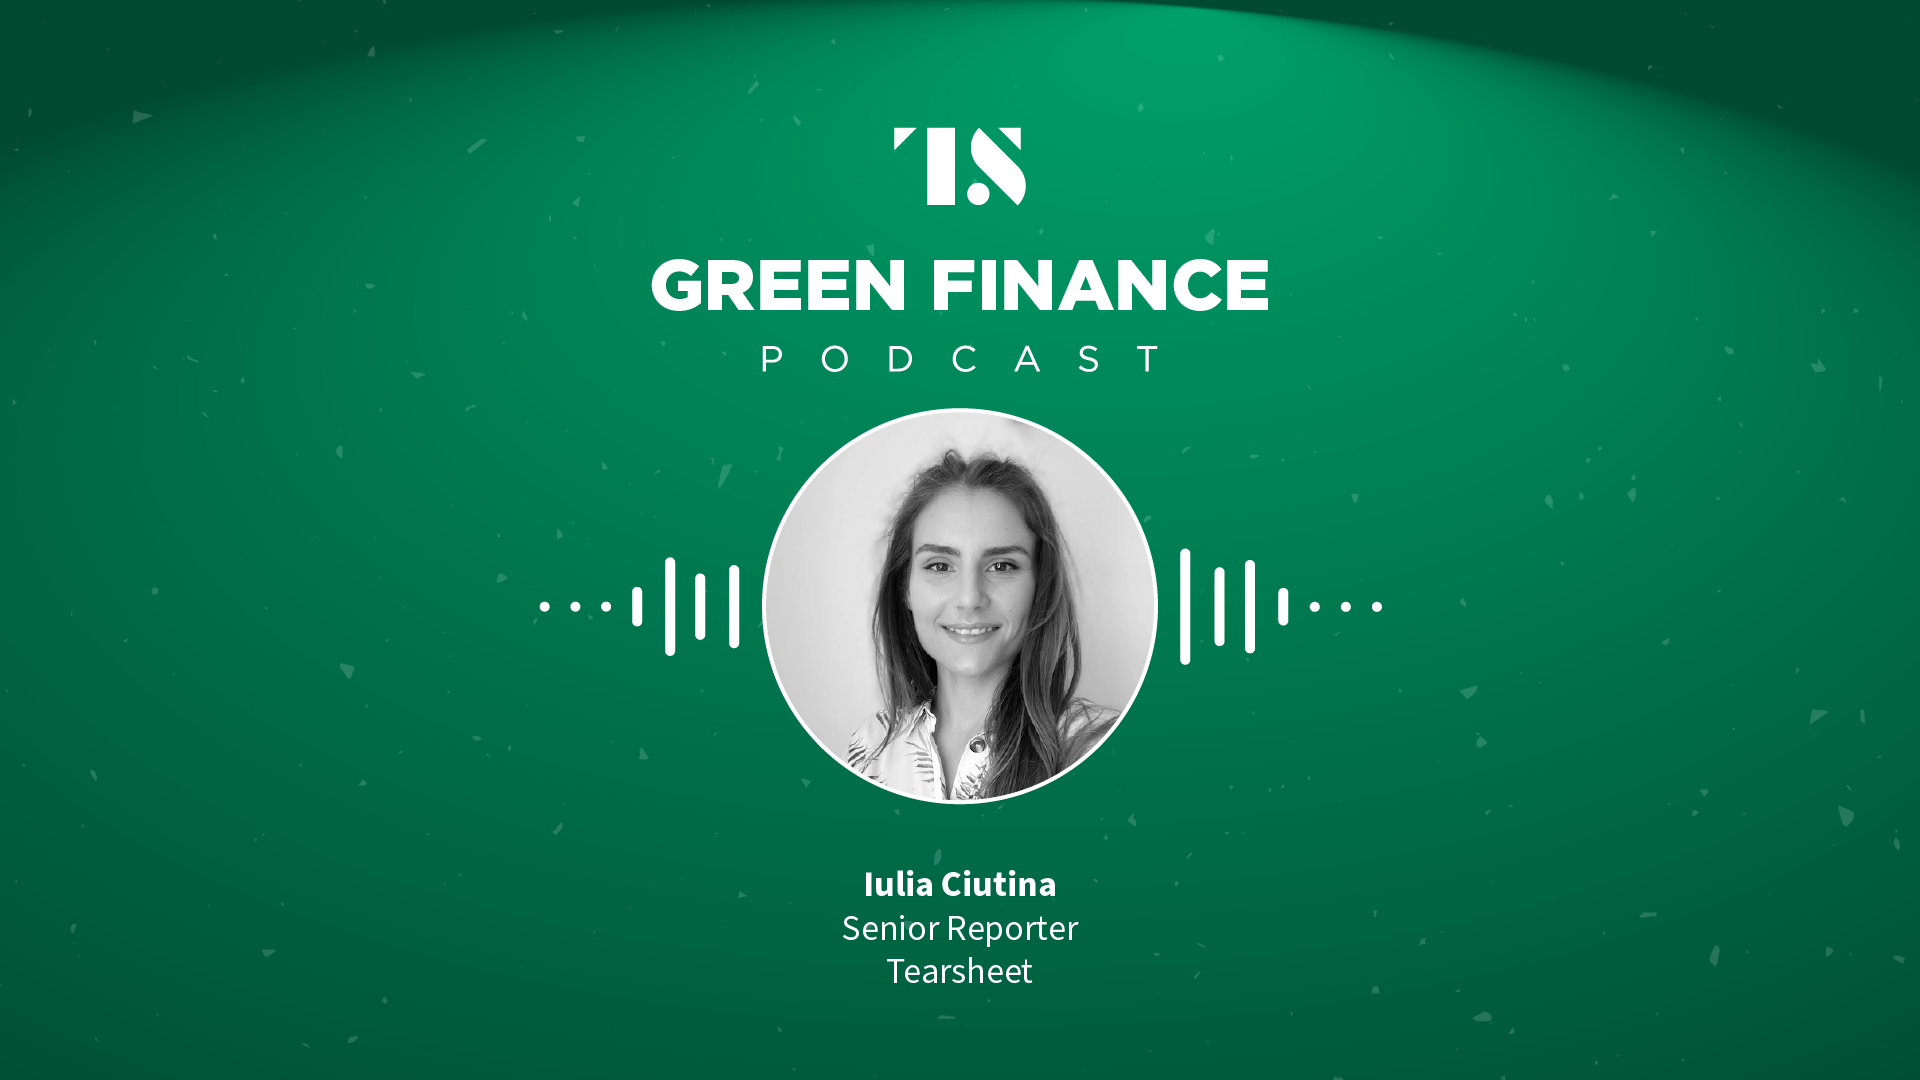 The Green Finance Podcast Ep. 2: The S in ESG and the role of inclusive product design